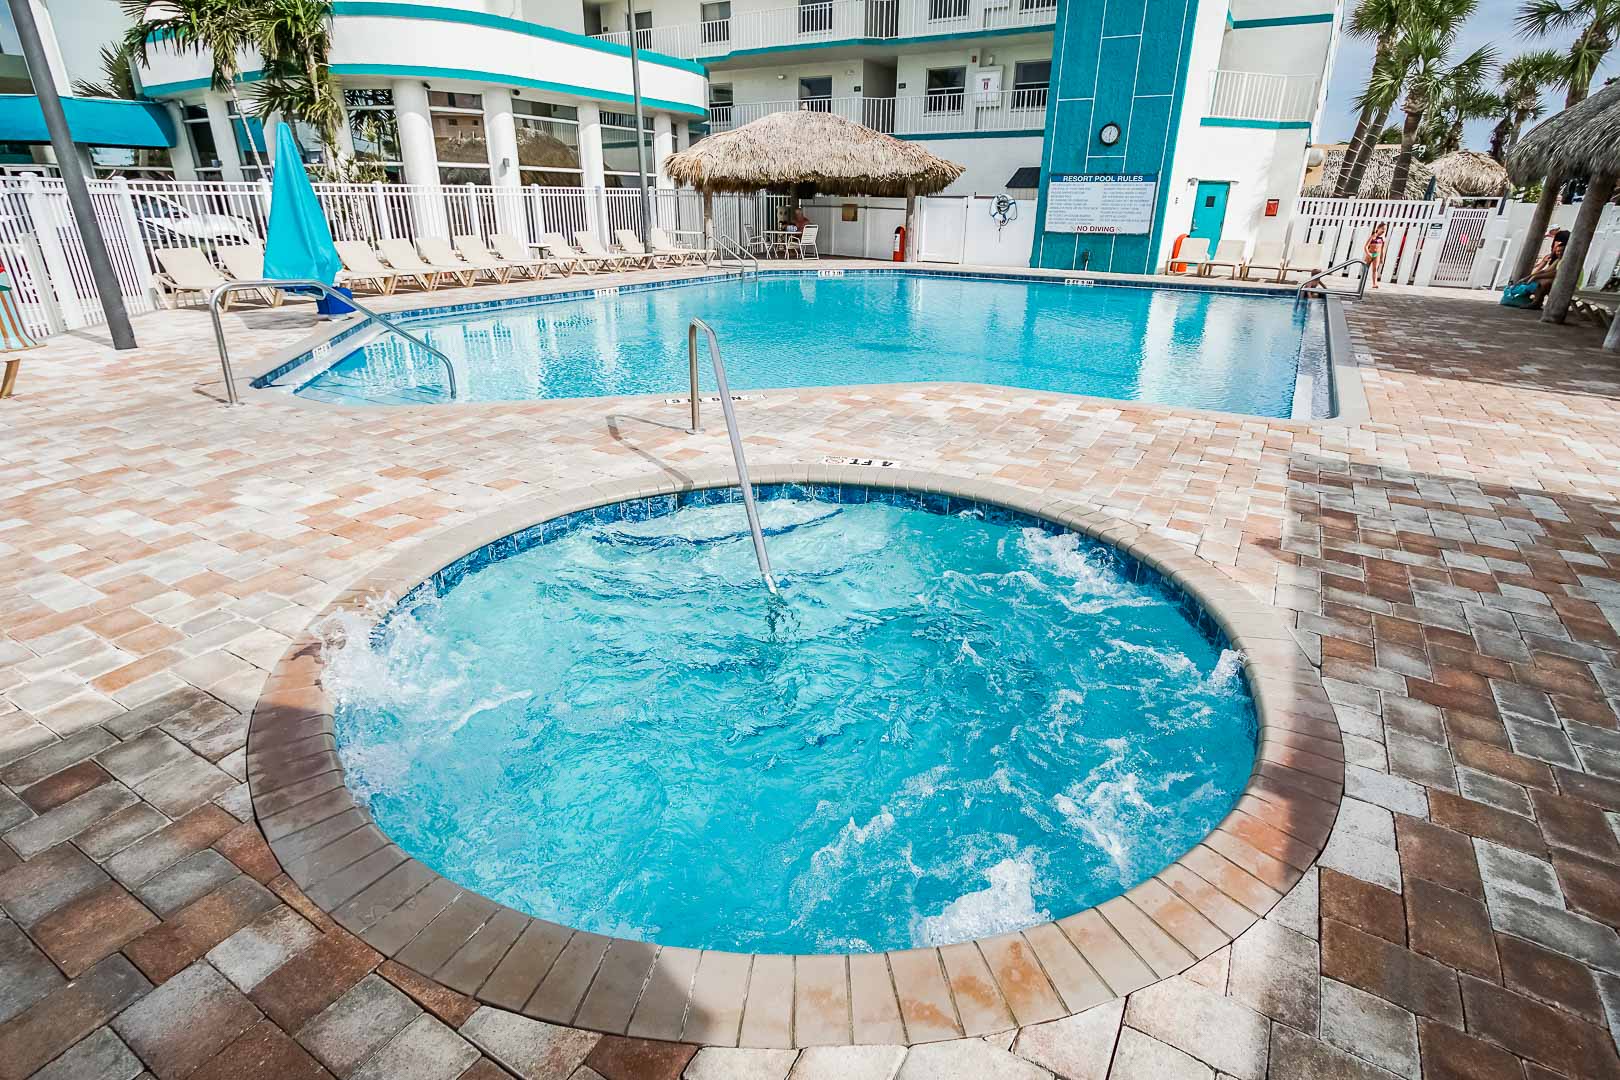 An outdoor Jacuzzi tub at VRI's Discovery Beach Resort in Cocoa Beach, Florida.